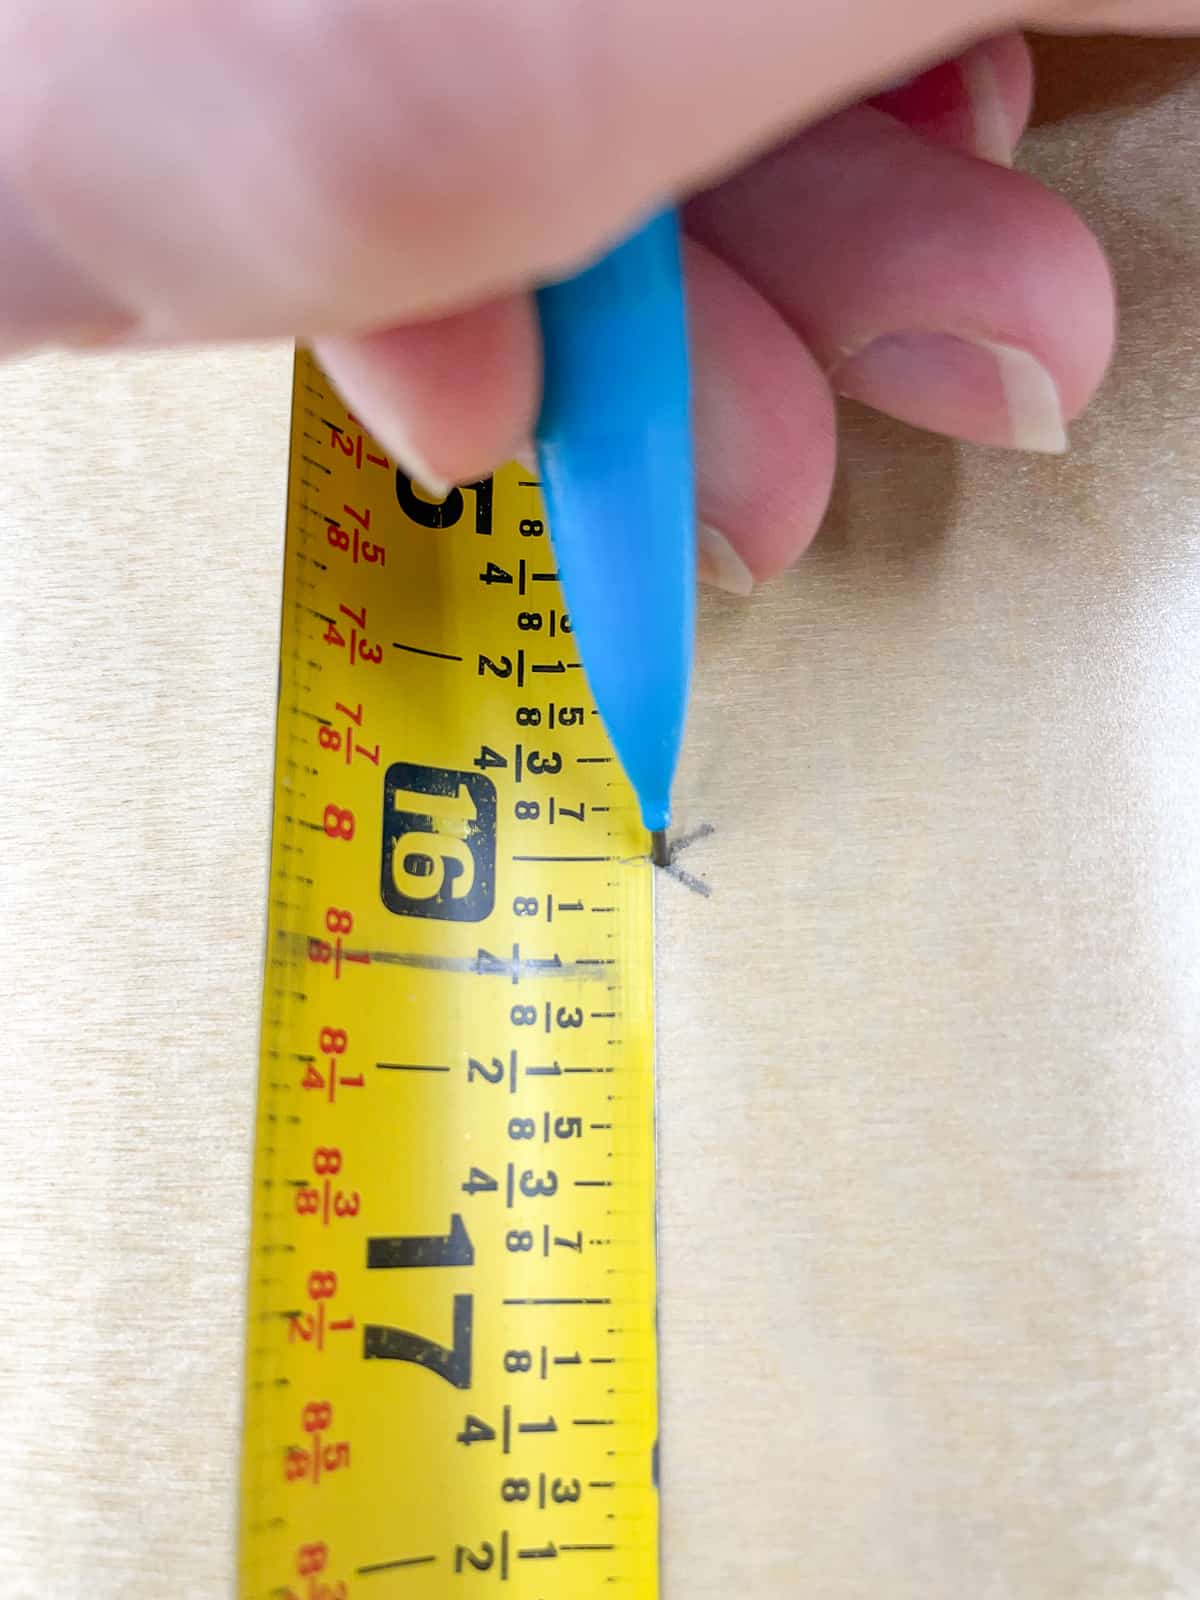 How to Read a Tape Measure: the Definitive Guide - My Simpatico Life